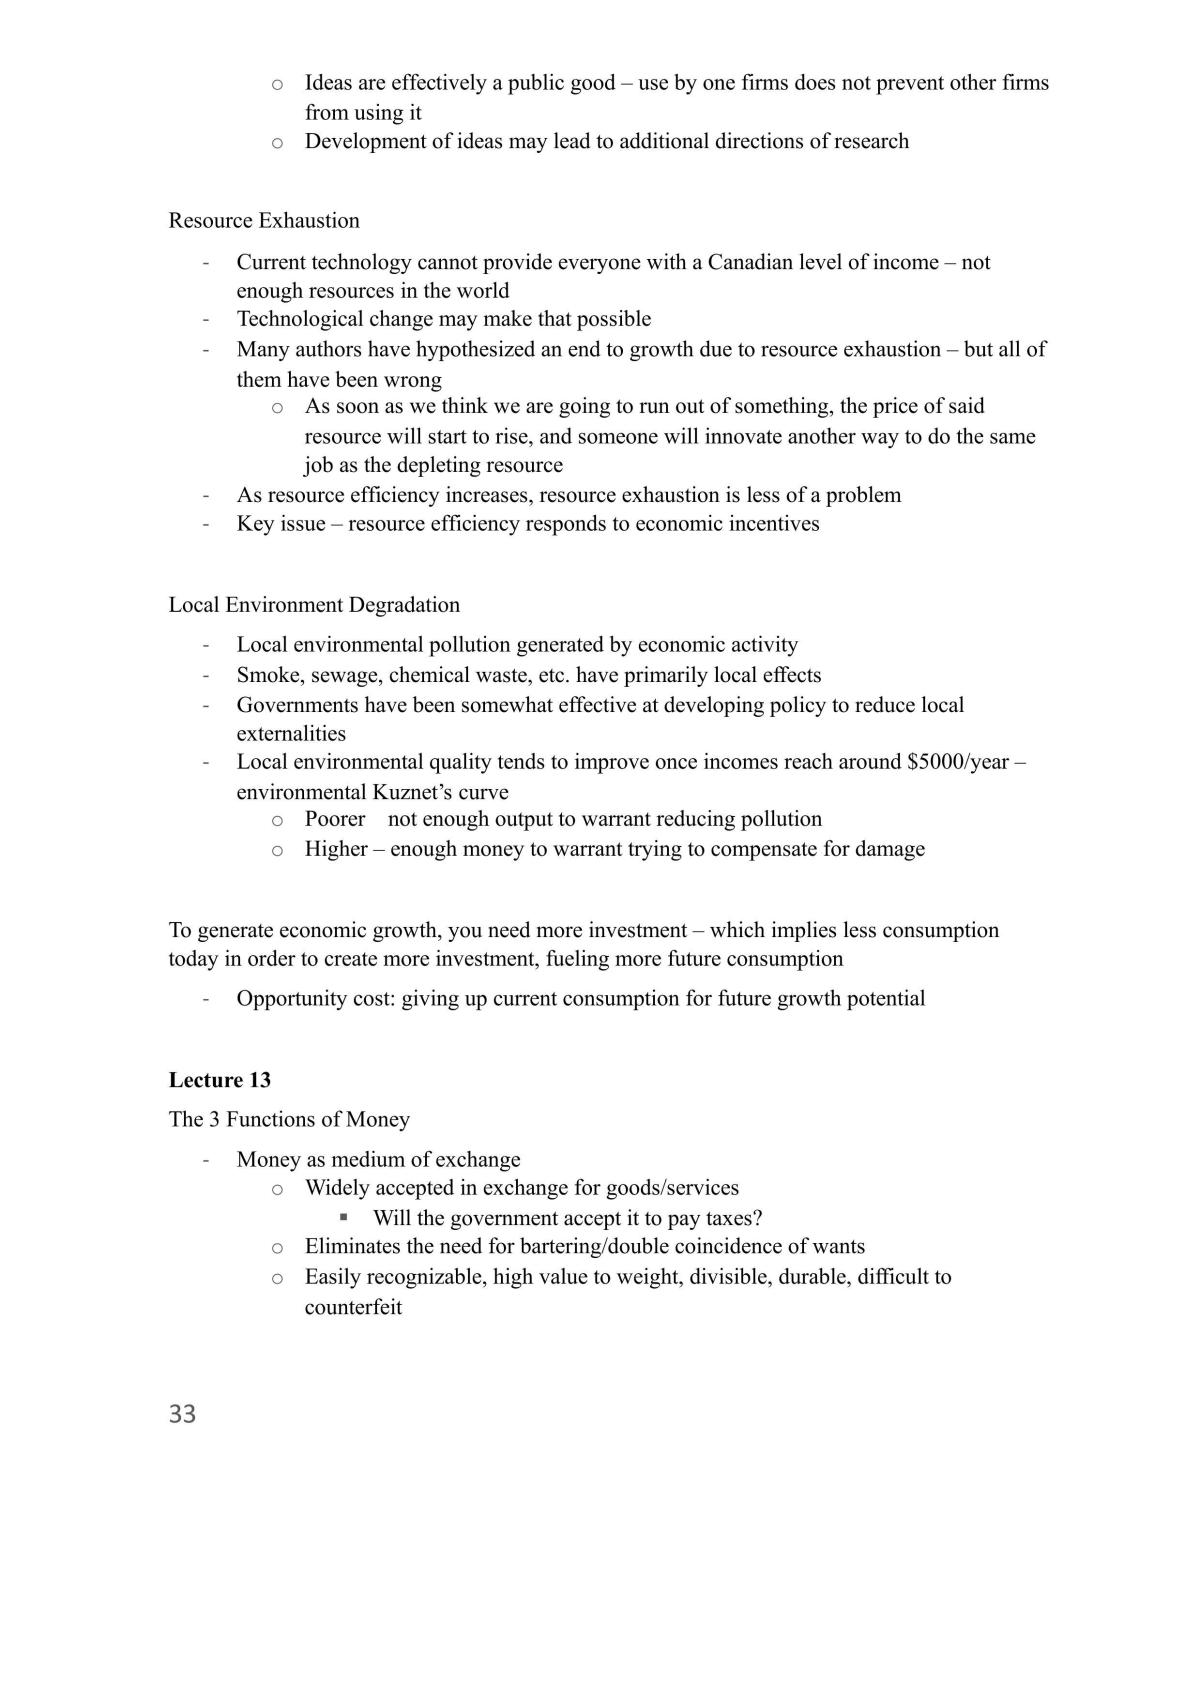 Introduction to Macroeconomics Course Notes - Page 33